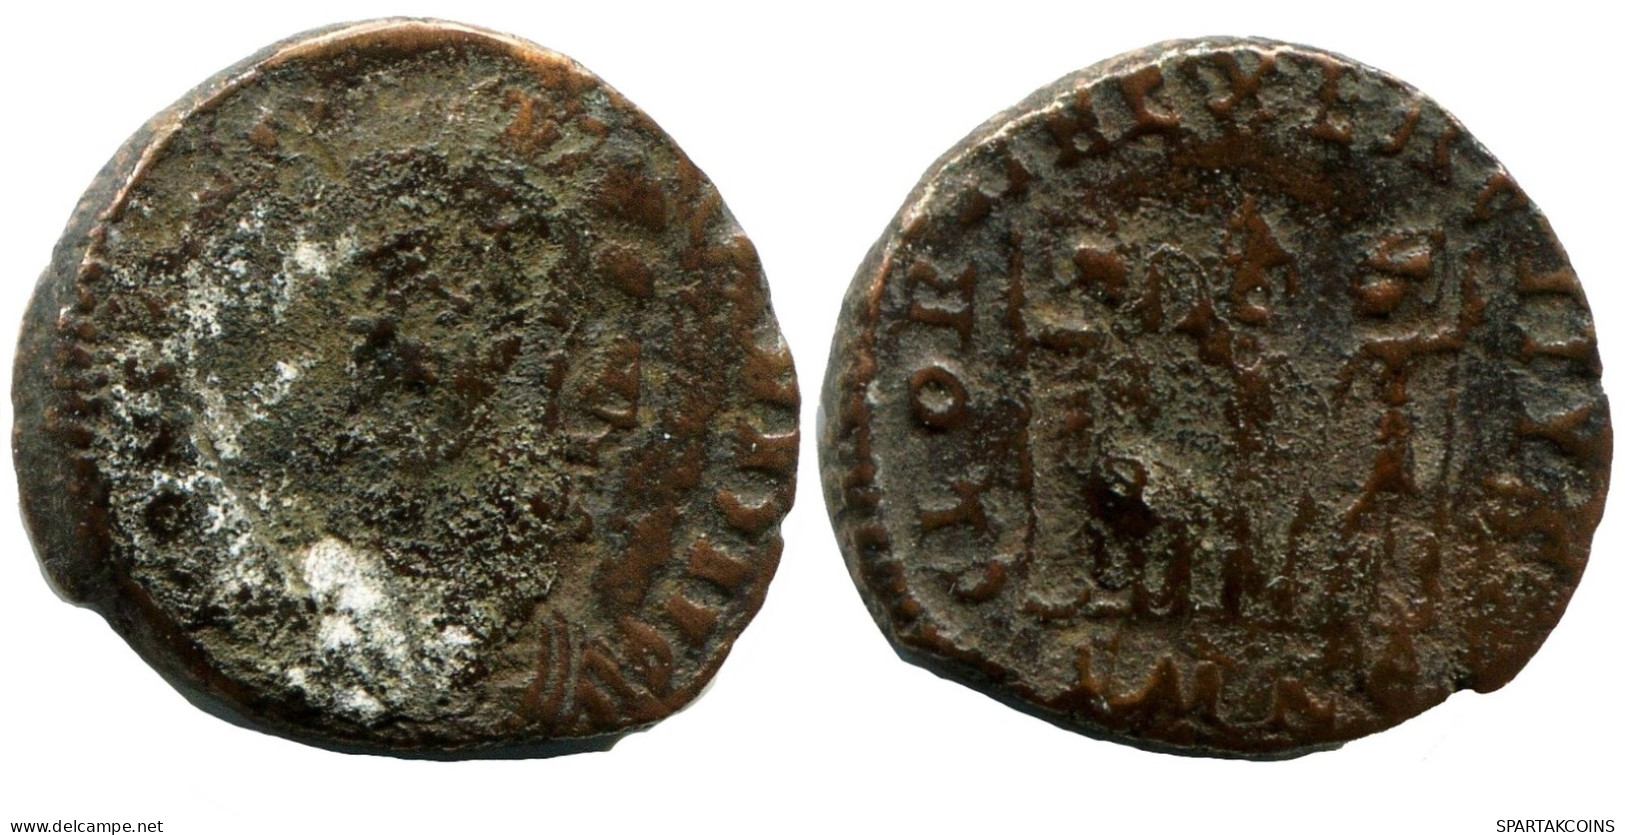 CONSTANTINE I MINTED IN CYZICUS FROM THE ROYAL ONTARIO MUSEUM #ANC11009.14.U.A - El Impero Christiano (307 / 363)